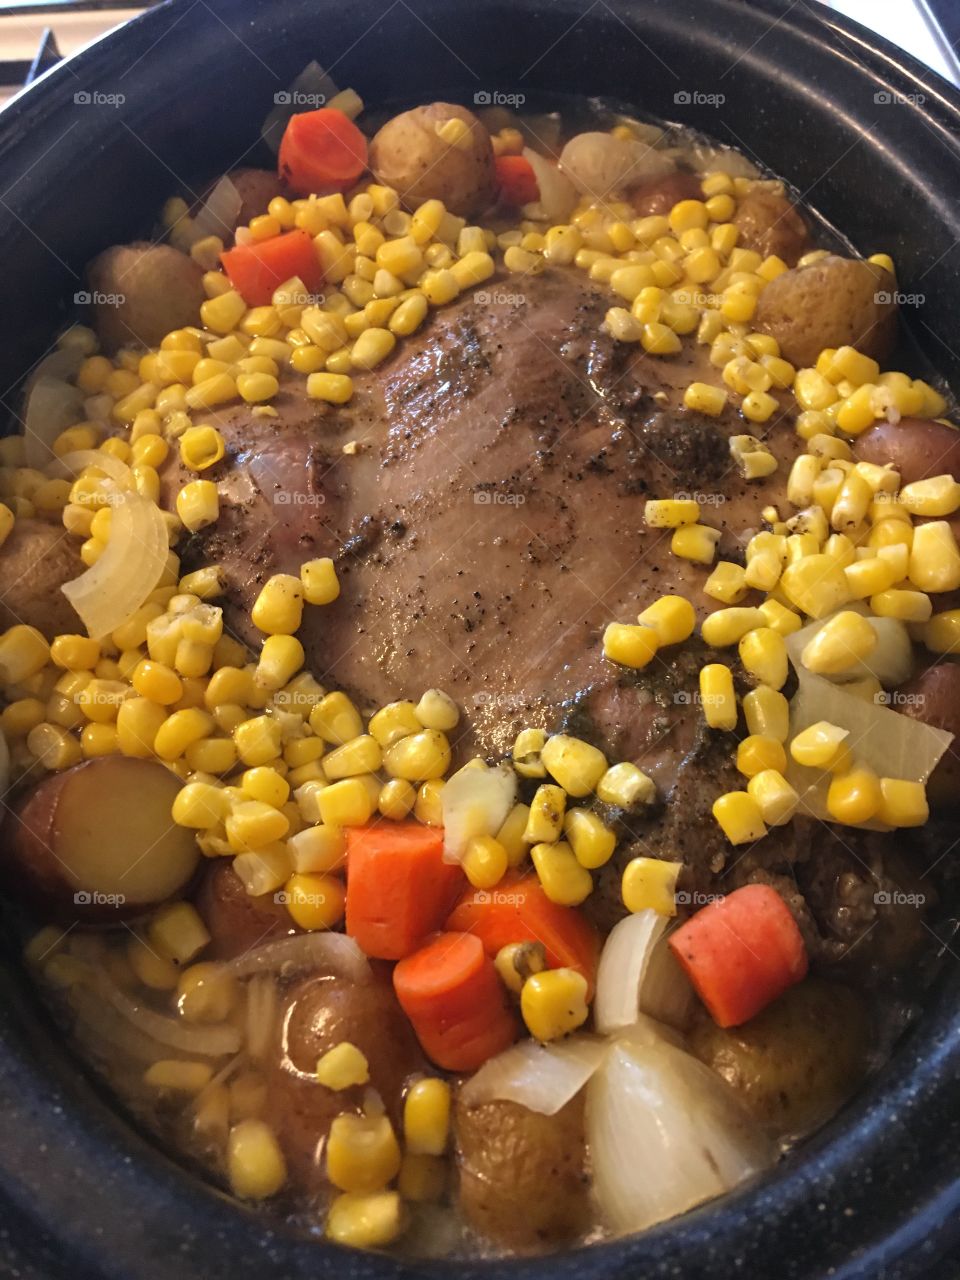 Deer roast with corn,carrots,onions and potatoes. Can you smell it? Sure smells yummy!